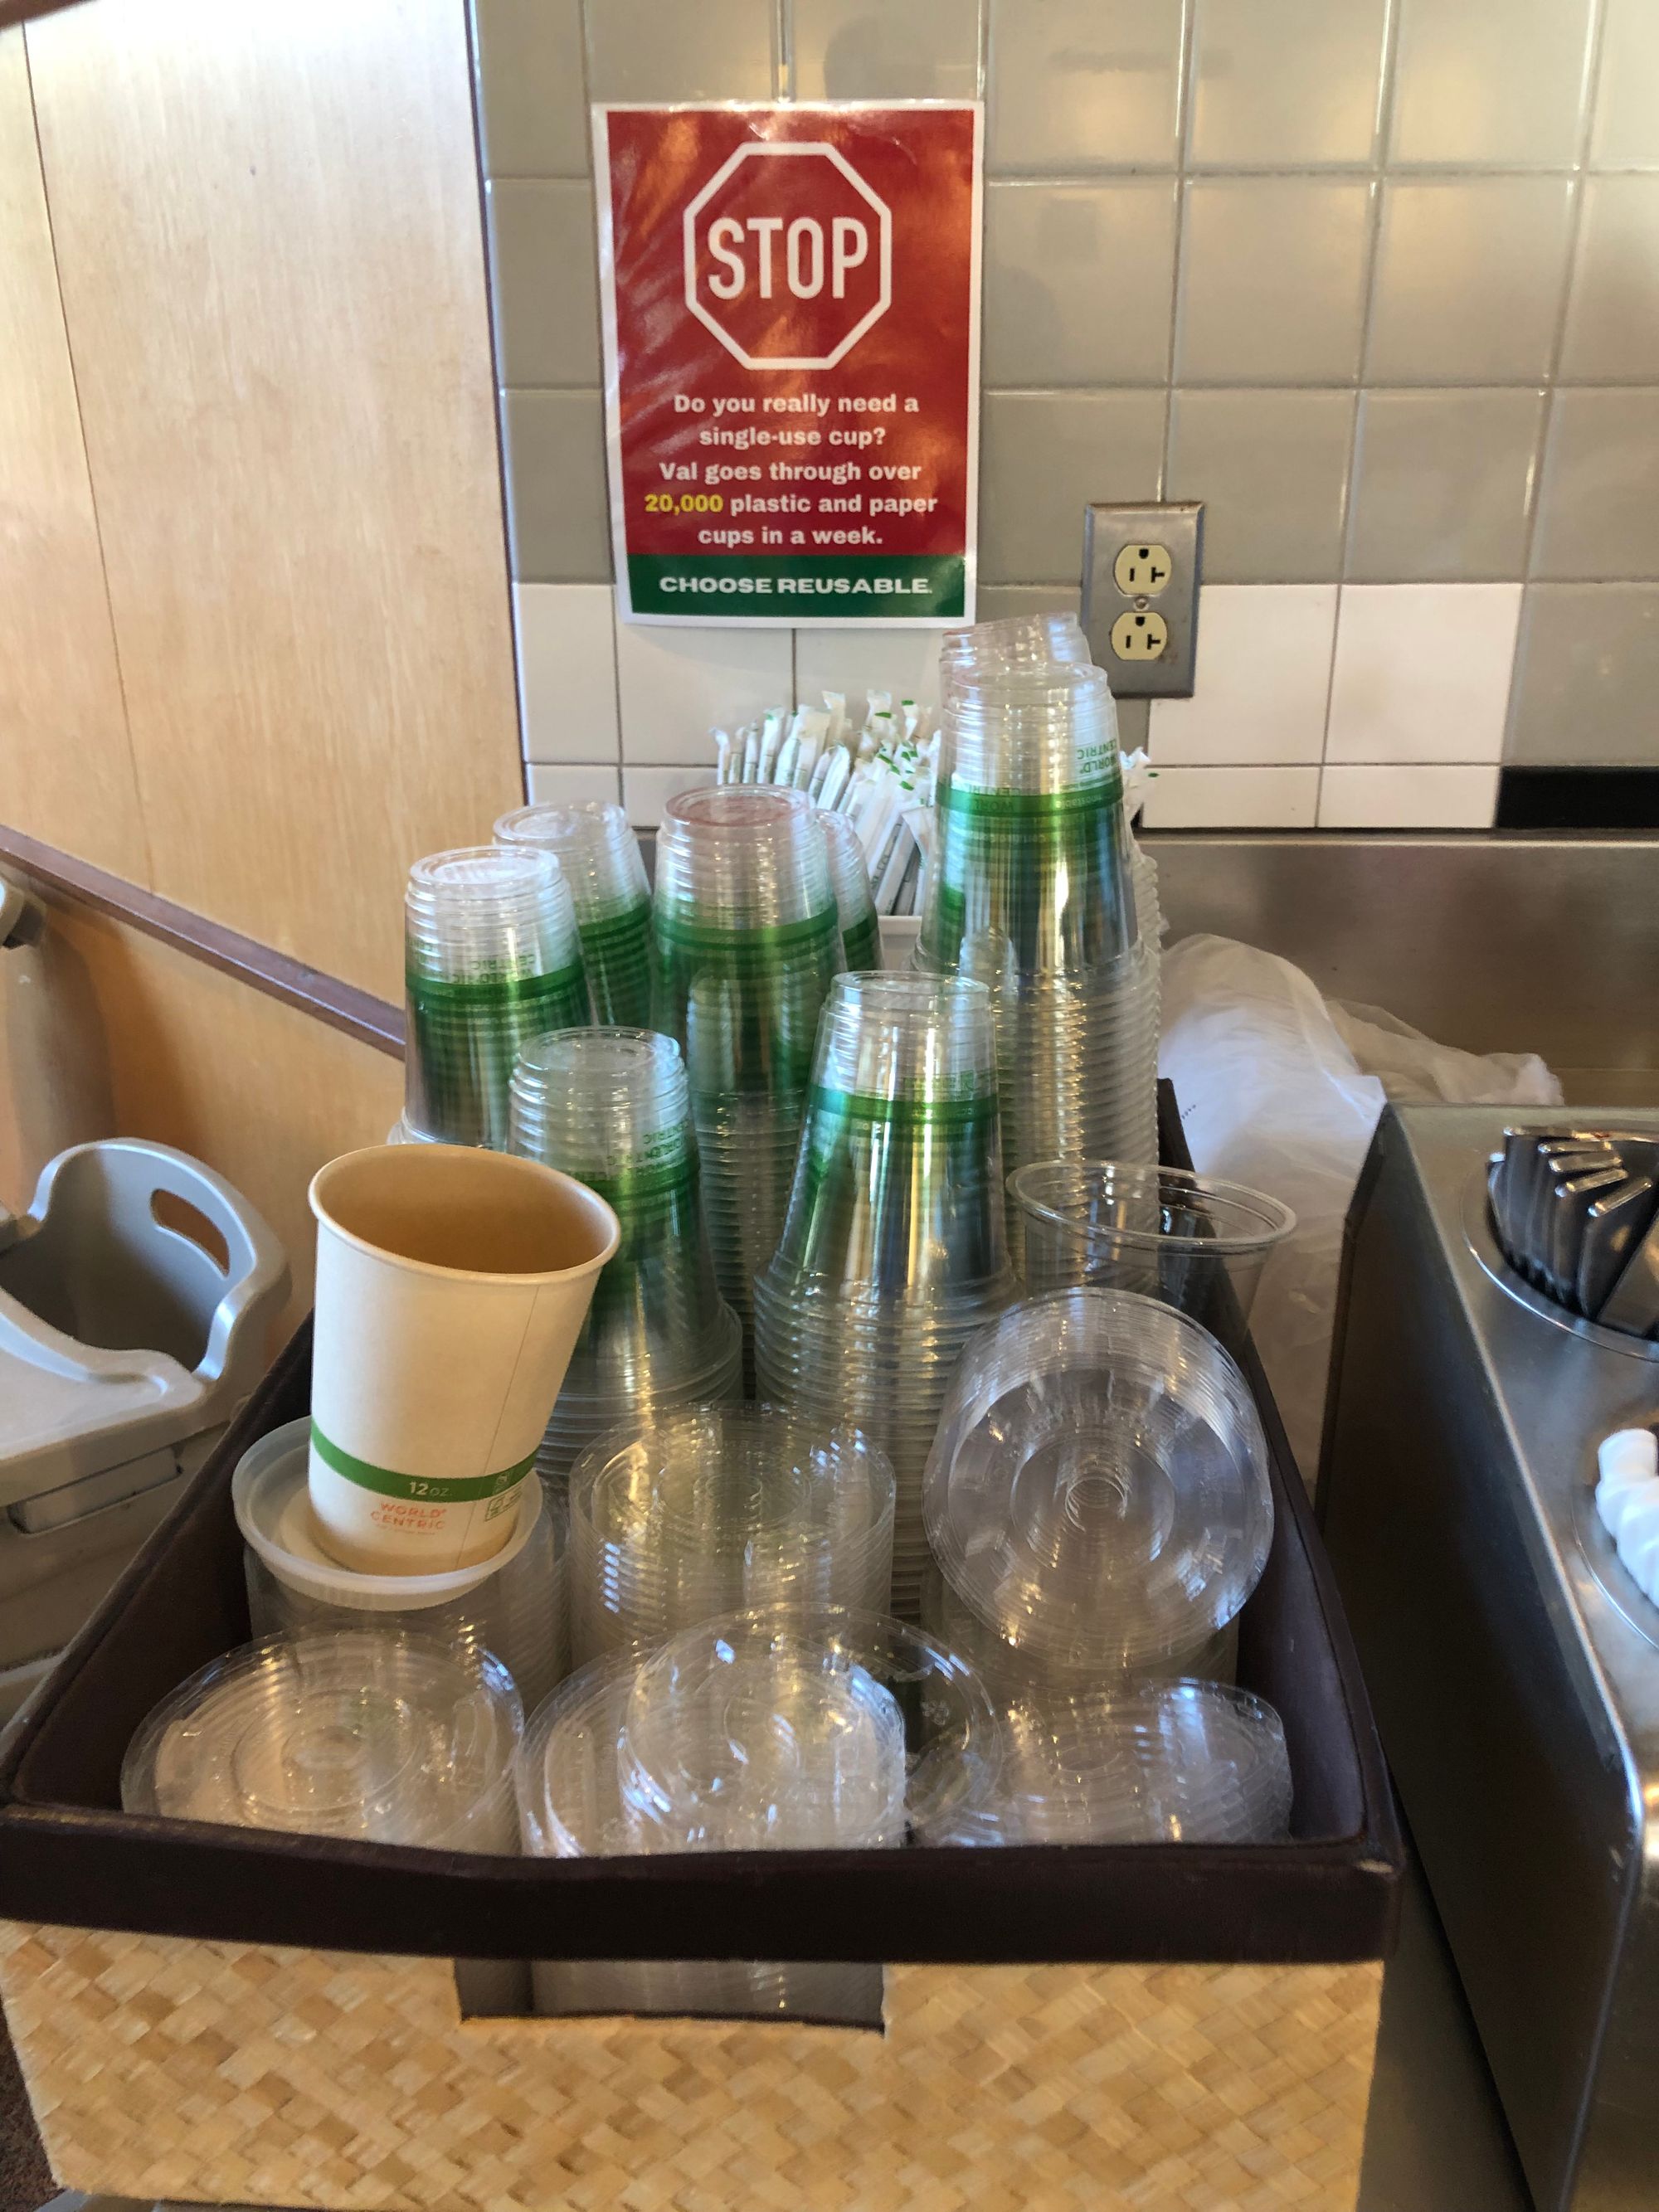 Coffee company tests reusable-cup-only policy - Springwise